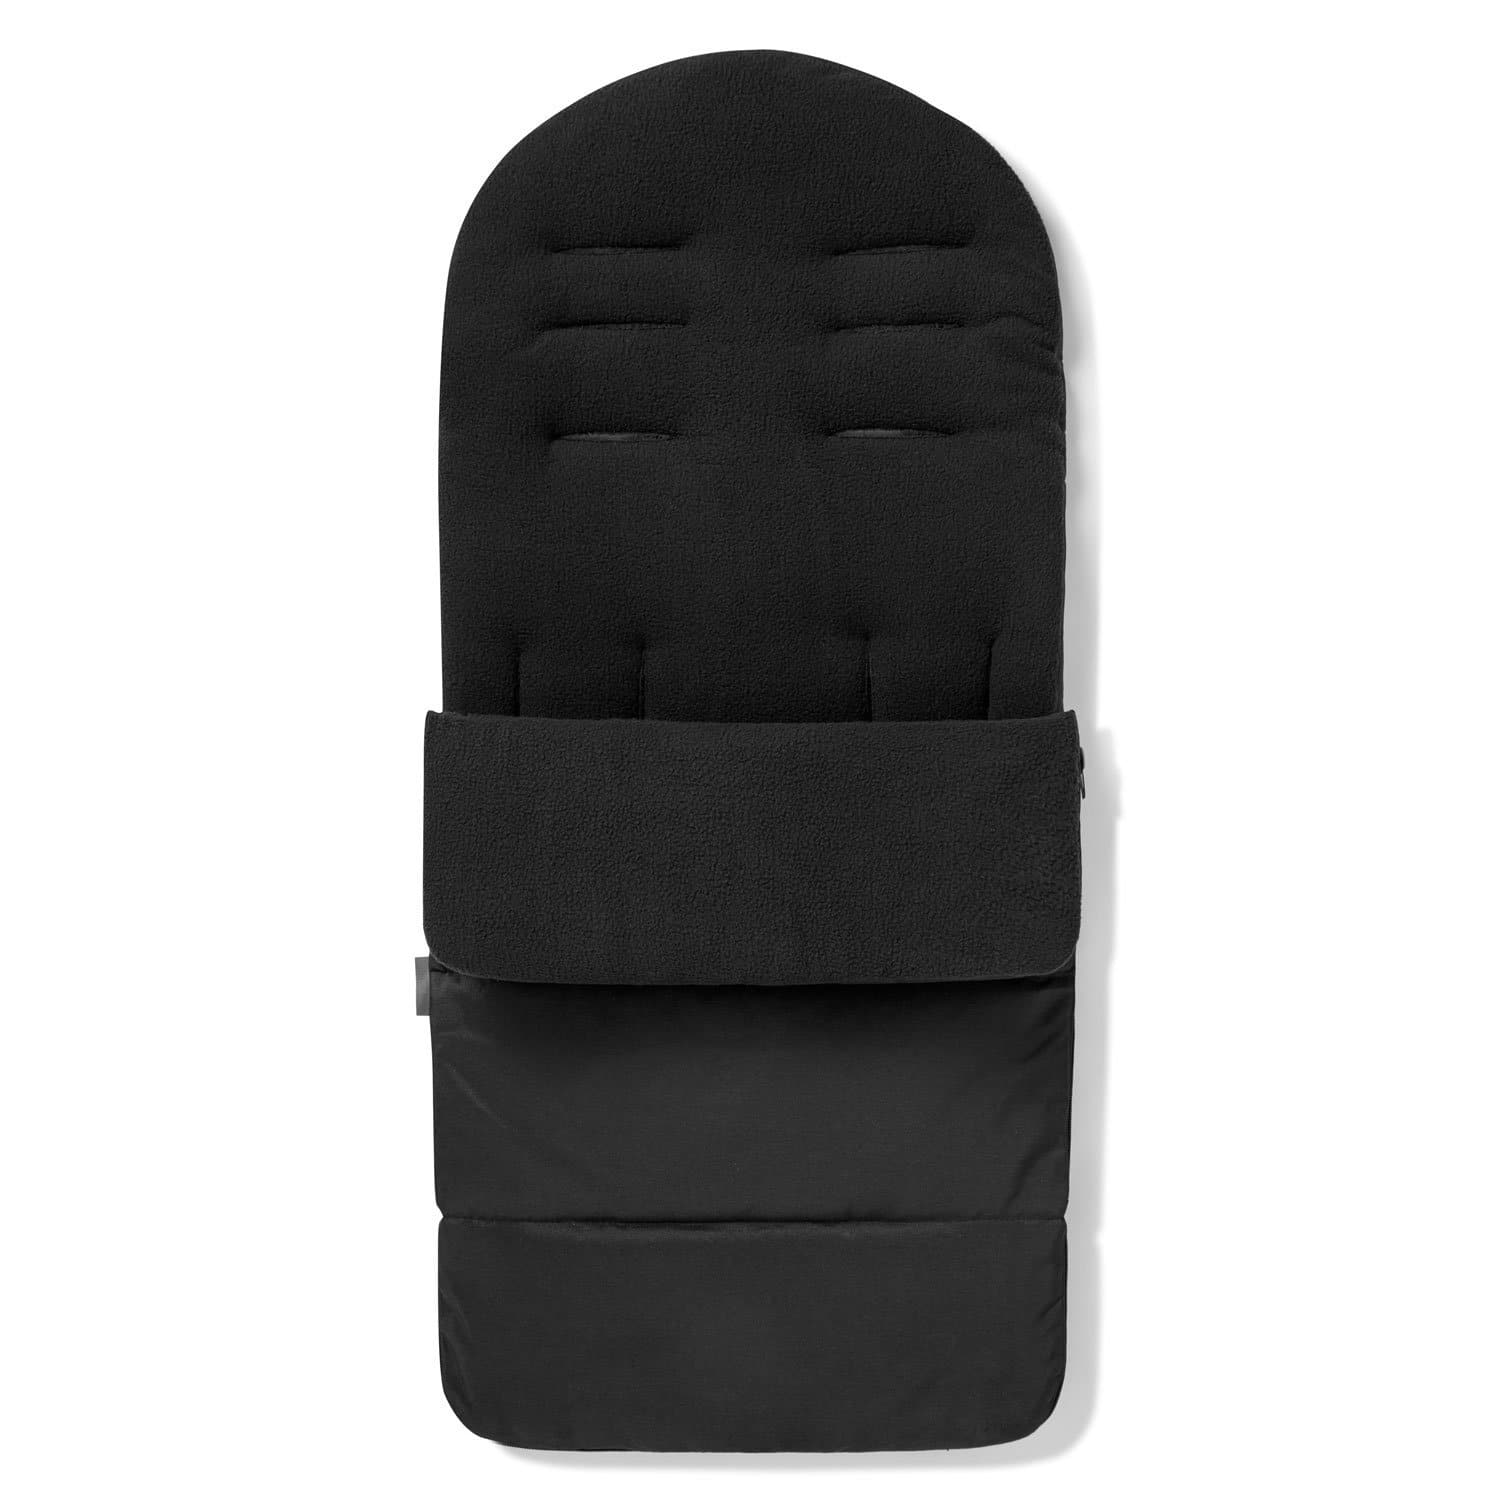 Premium Footmuff / Cosy Toes Compatible with BabyCare - Black Jack / Fits All Models | For Your Little One